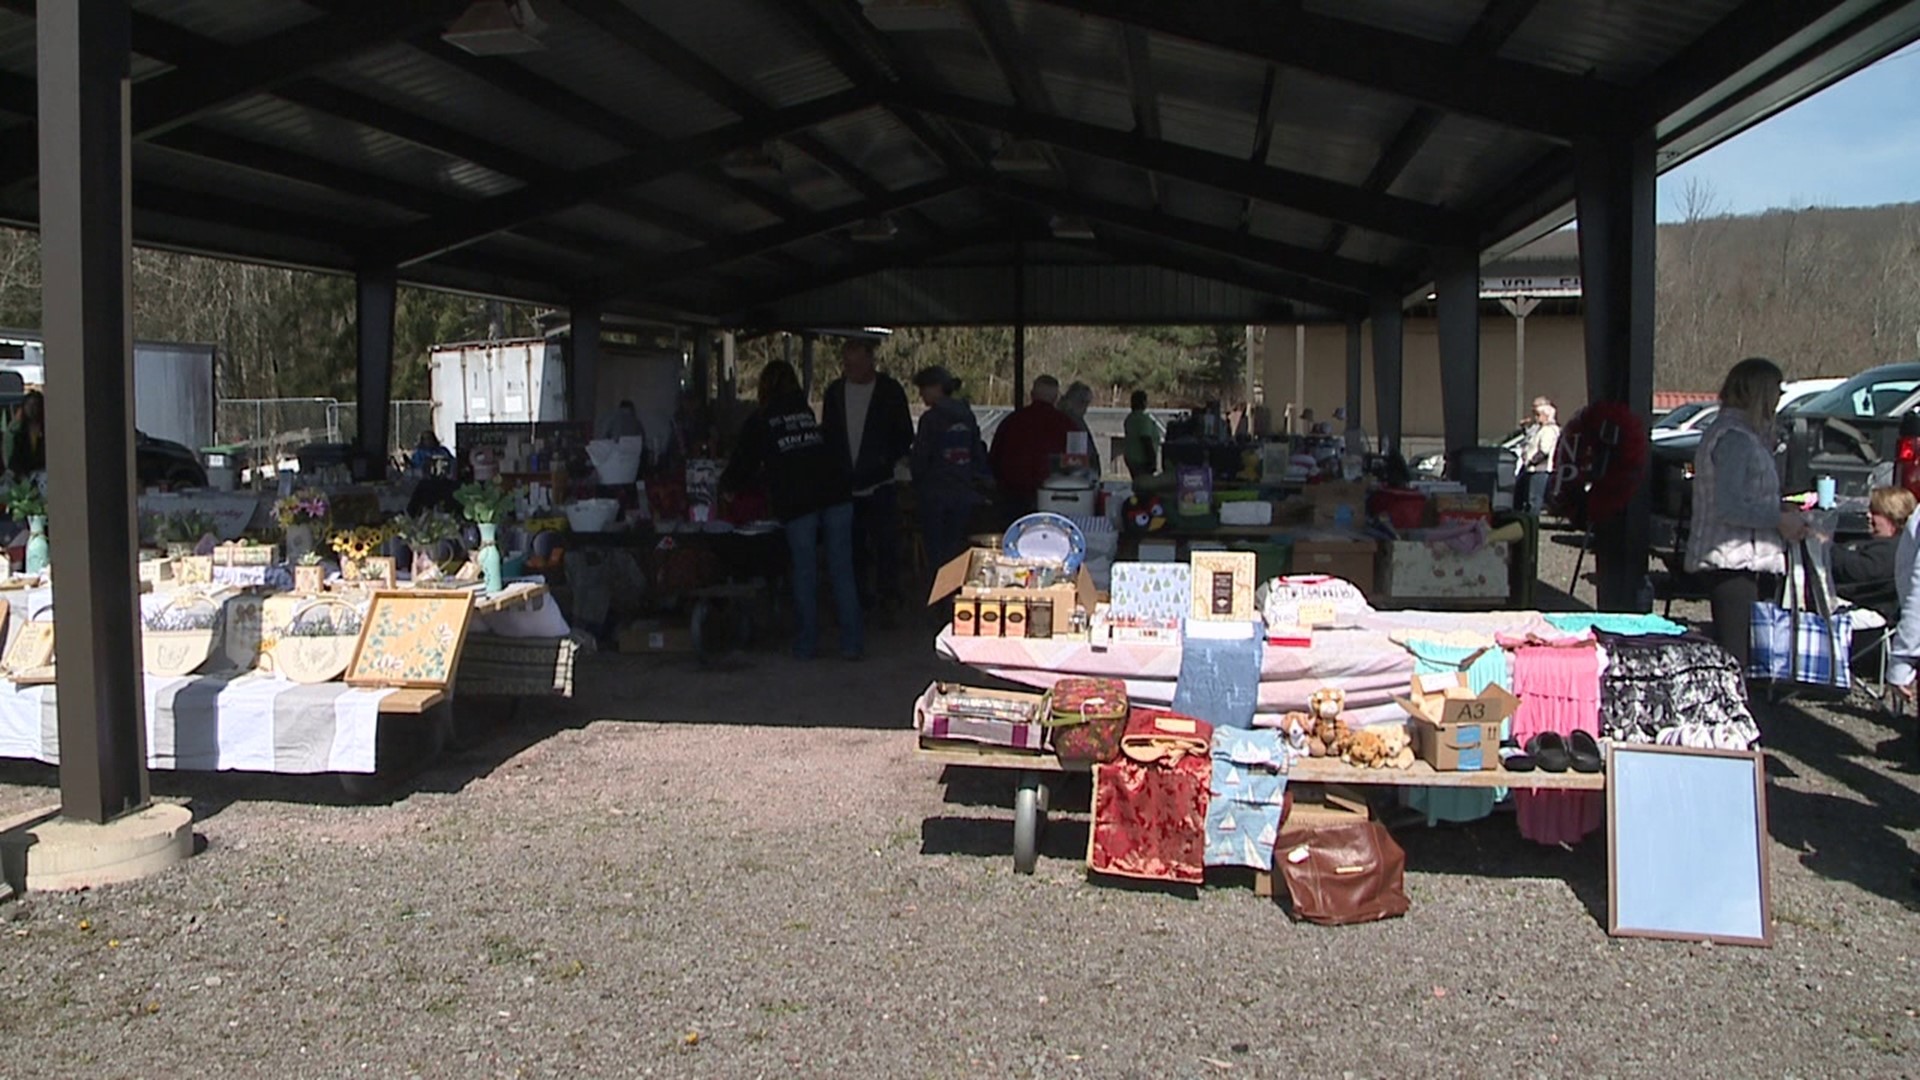 The flea market took place at the Jefferson Township Volunteer Fire Company from 8 a.m. to 1 p.m.